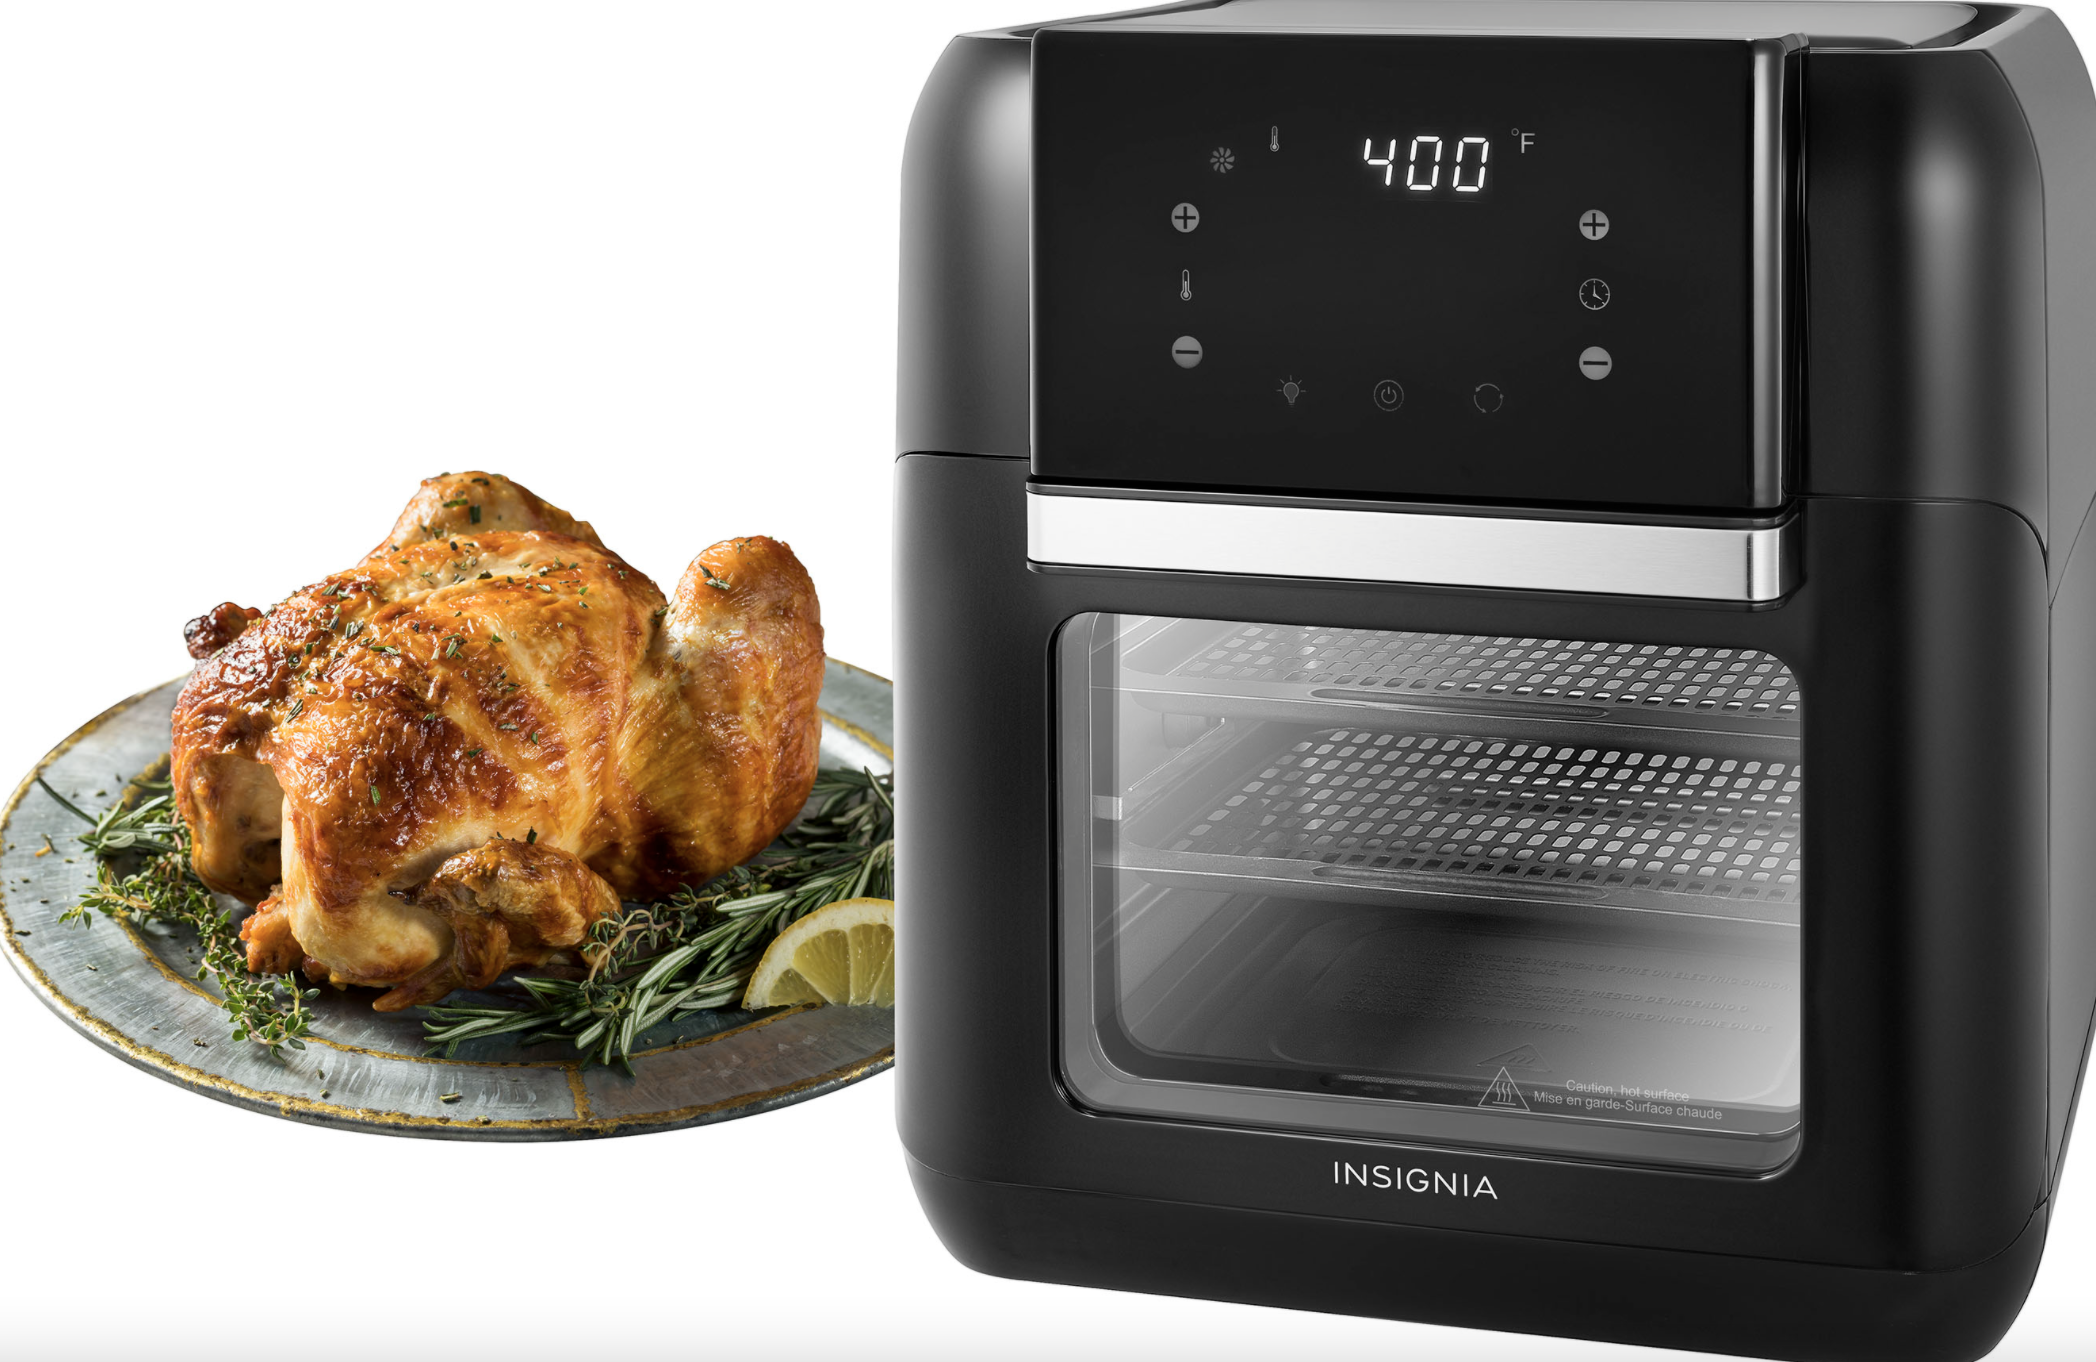 black air fryer next to a plate with a rotisserie chicken